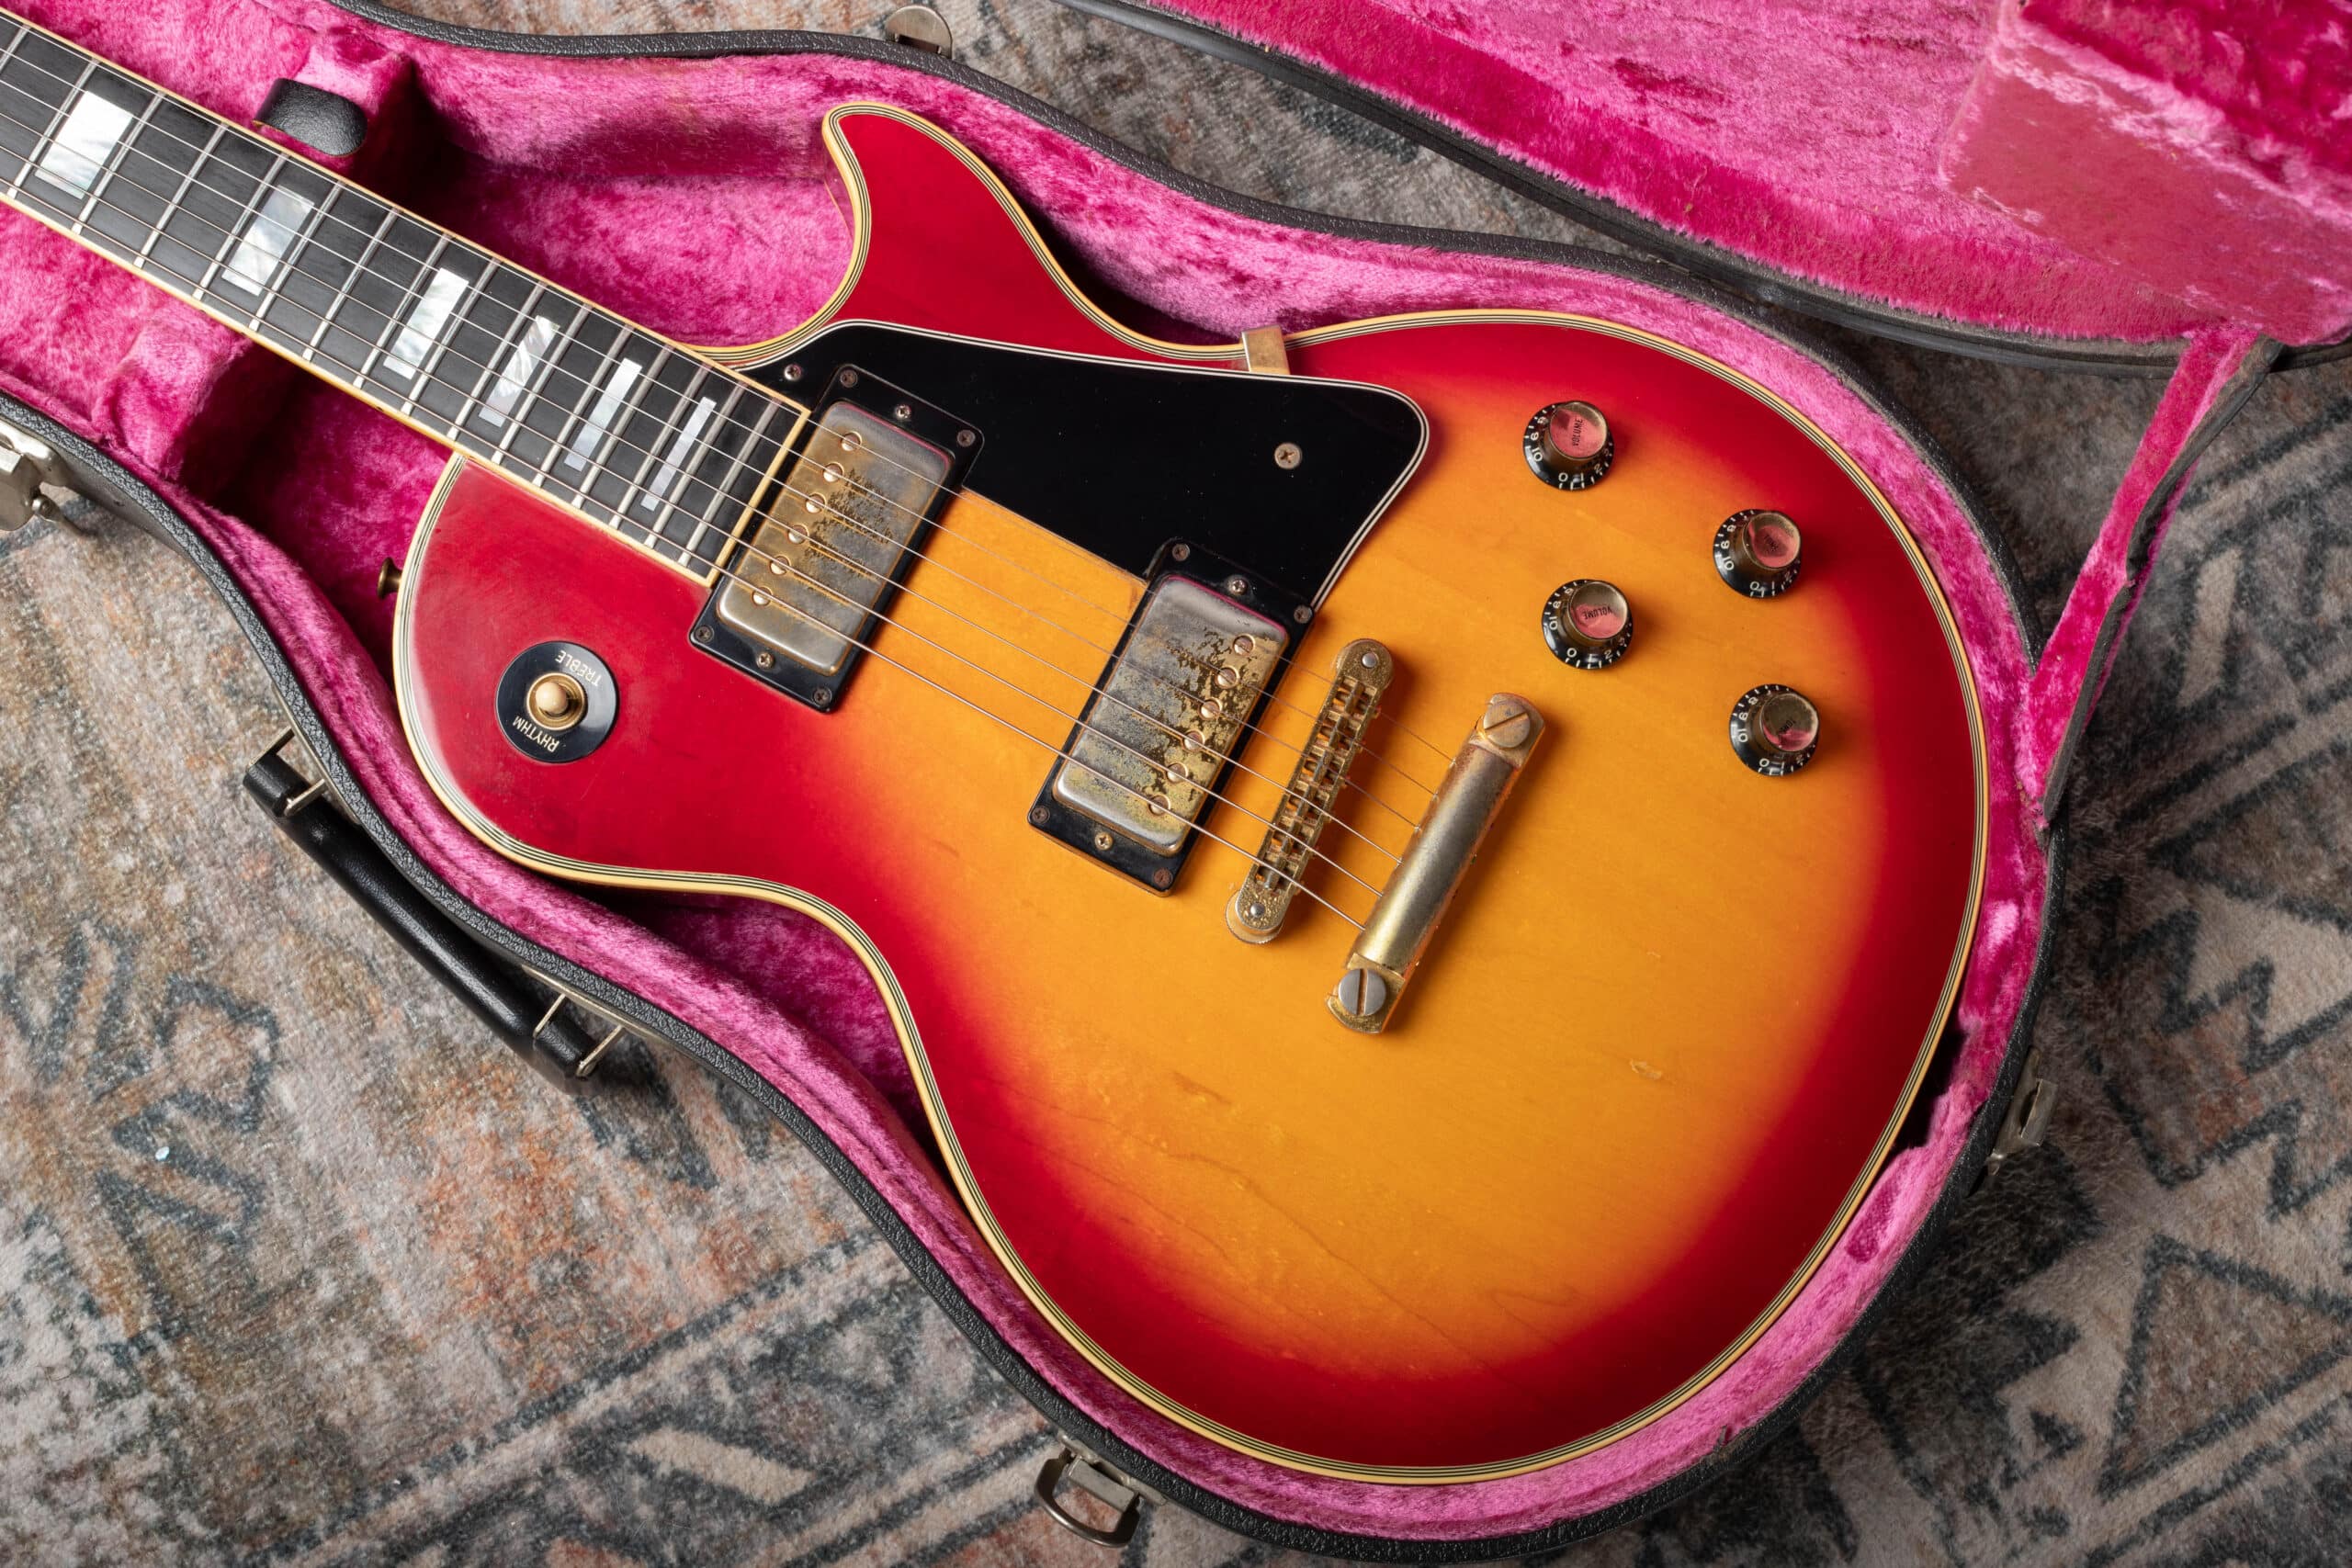 A 1976 Gibson Les Paul Custom in its case.